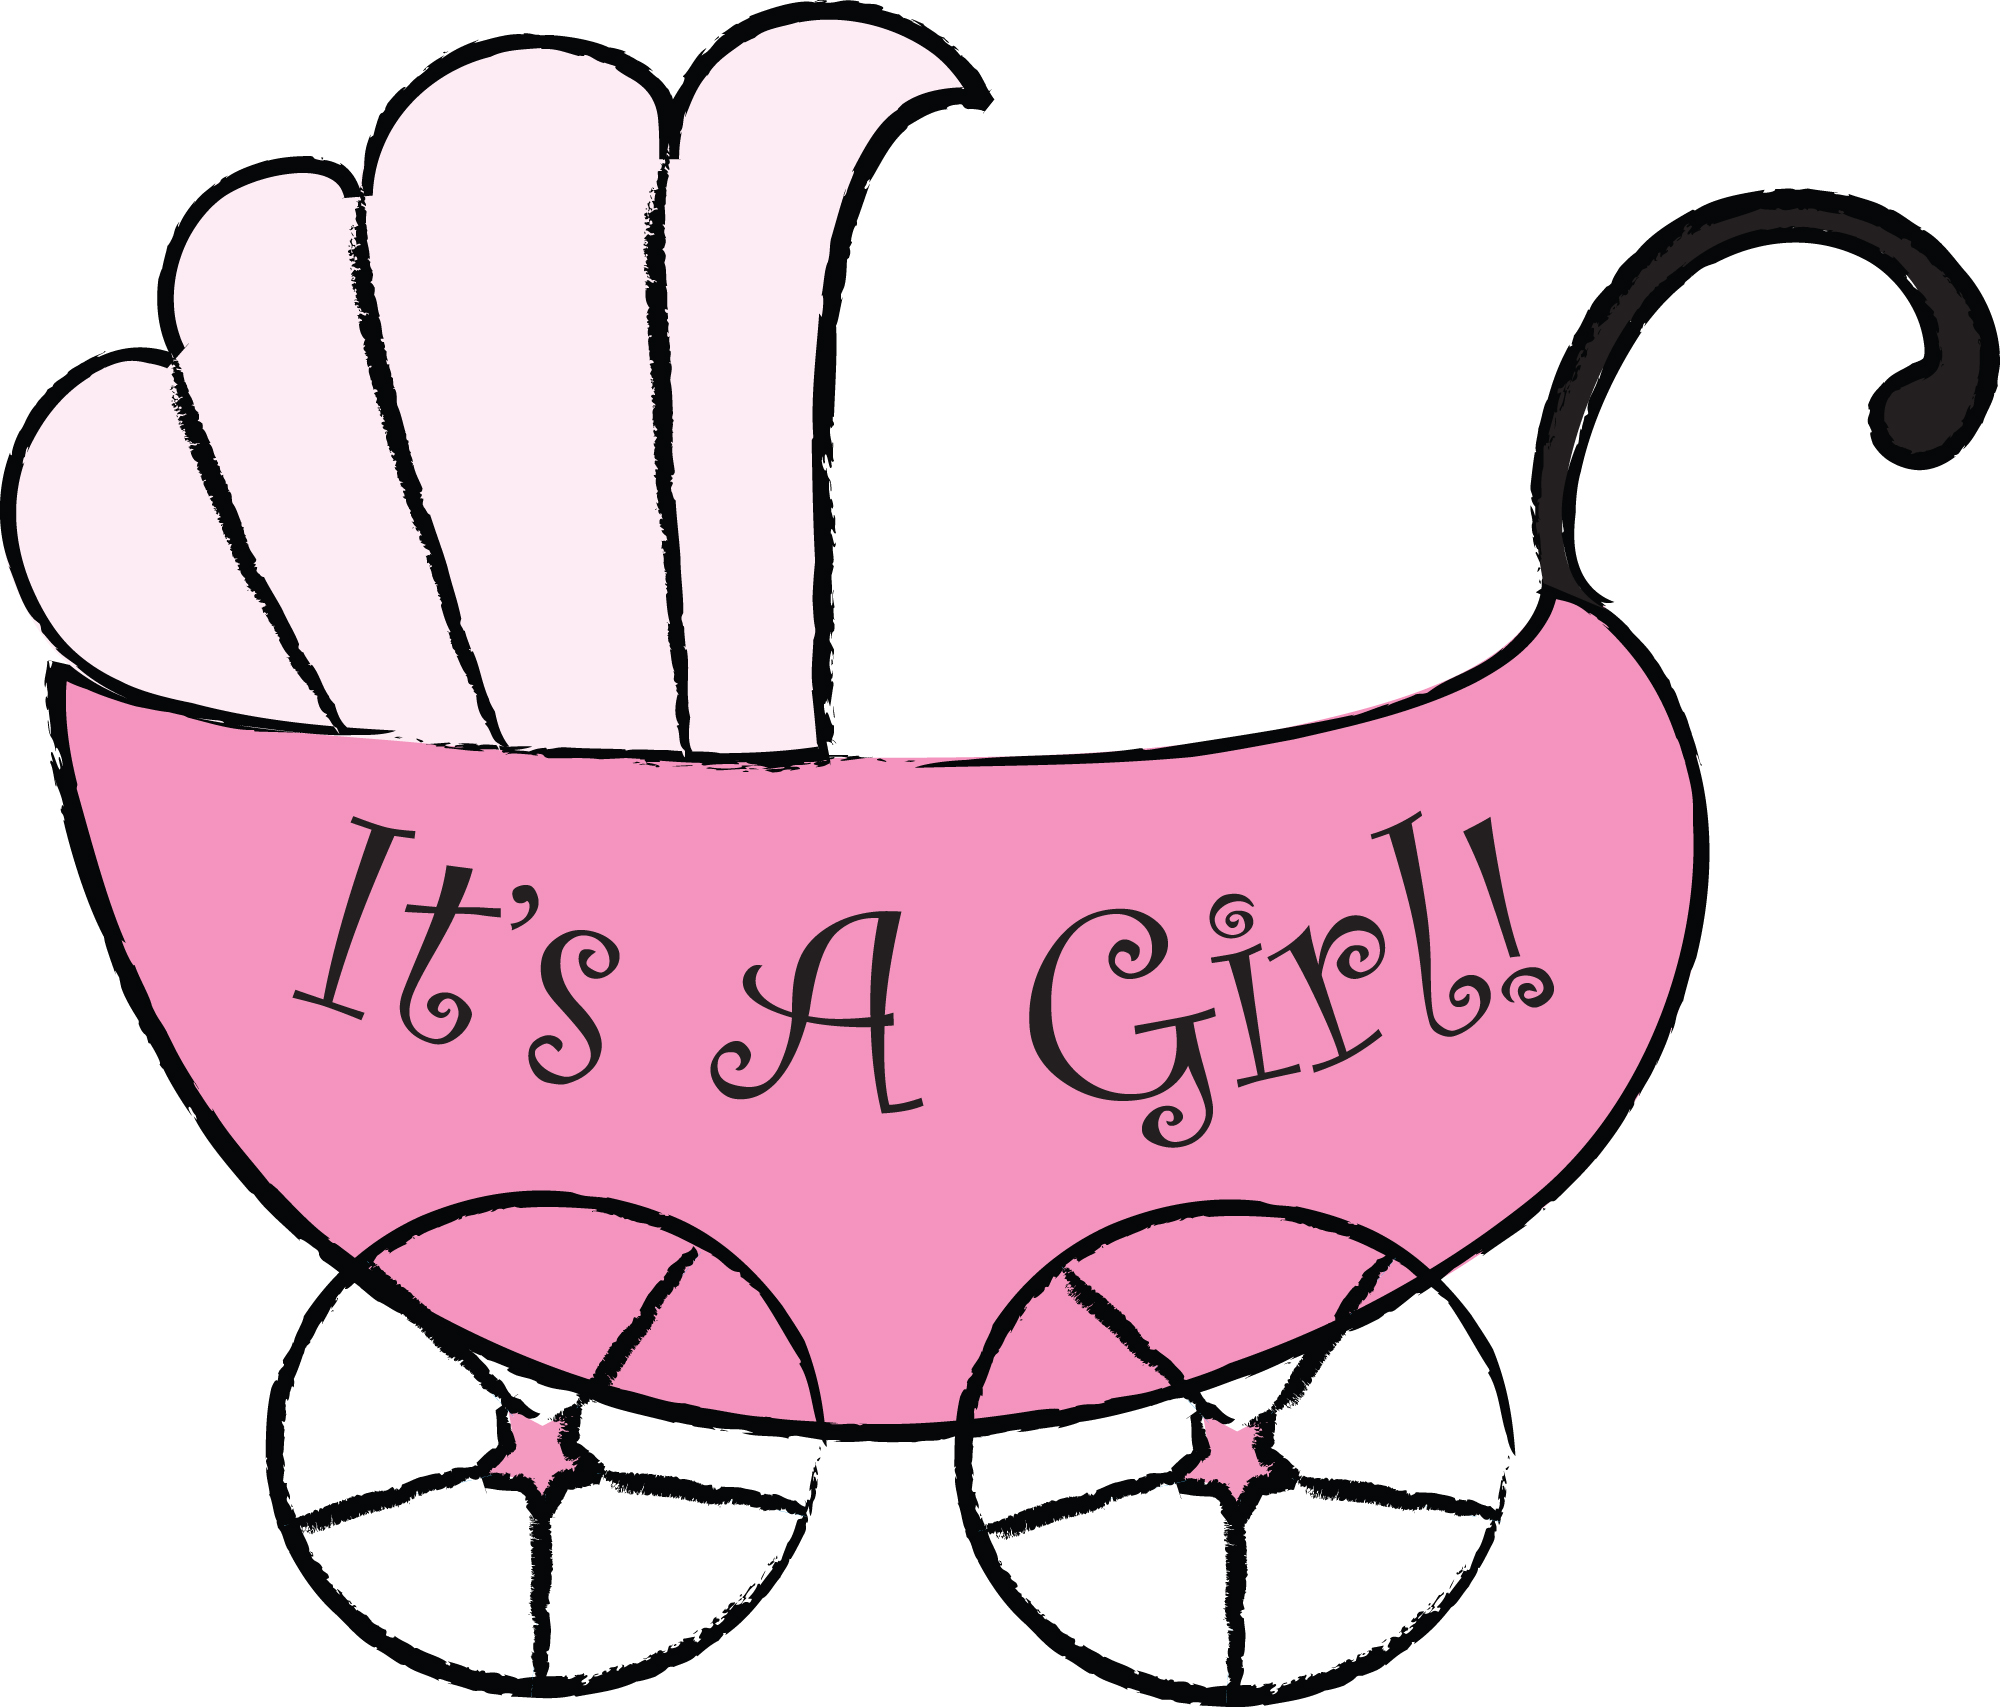 Its A Girl Maybe The Red Headed Hostess clipart free image.